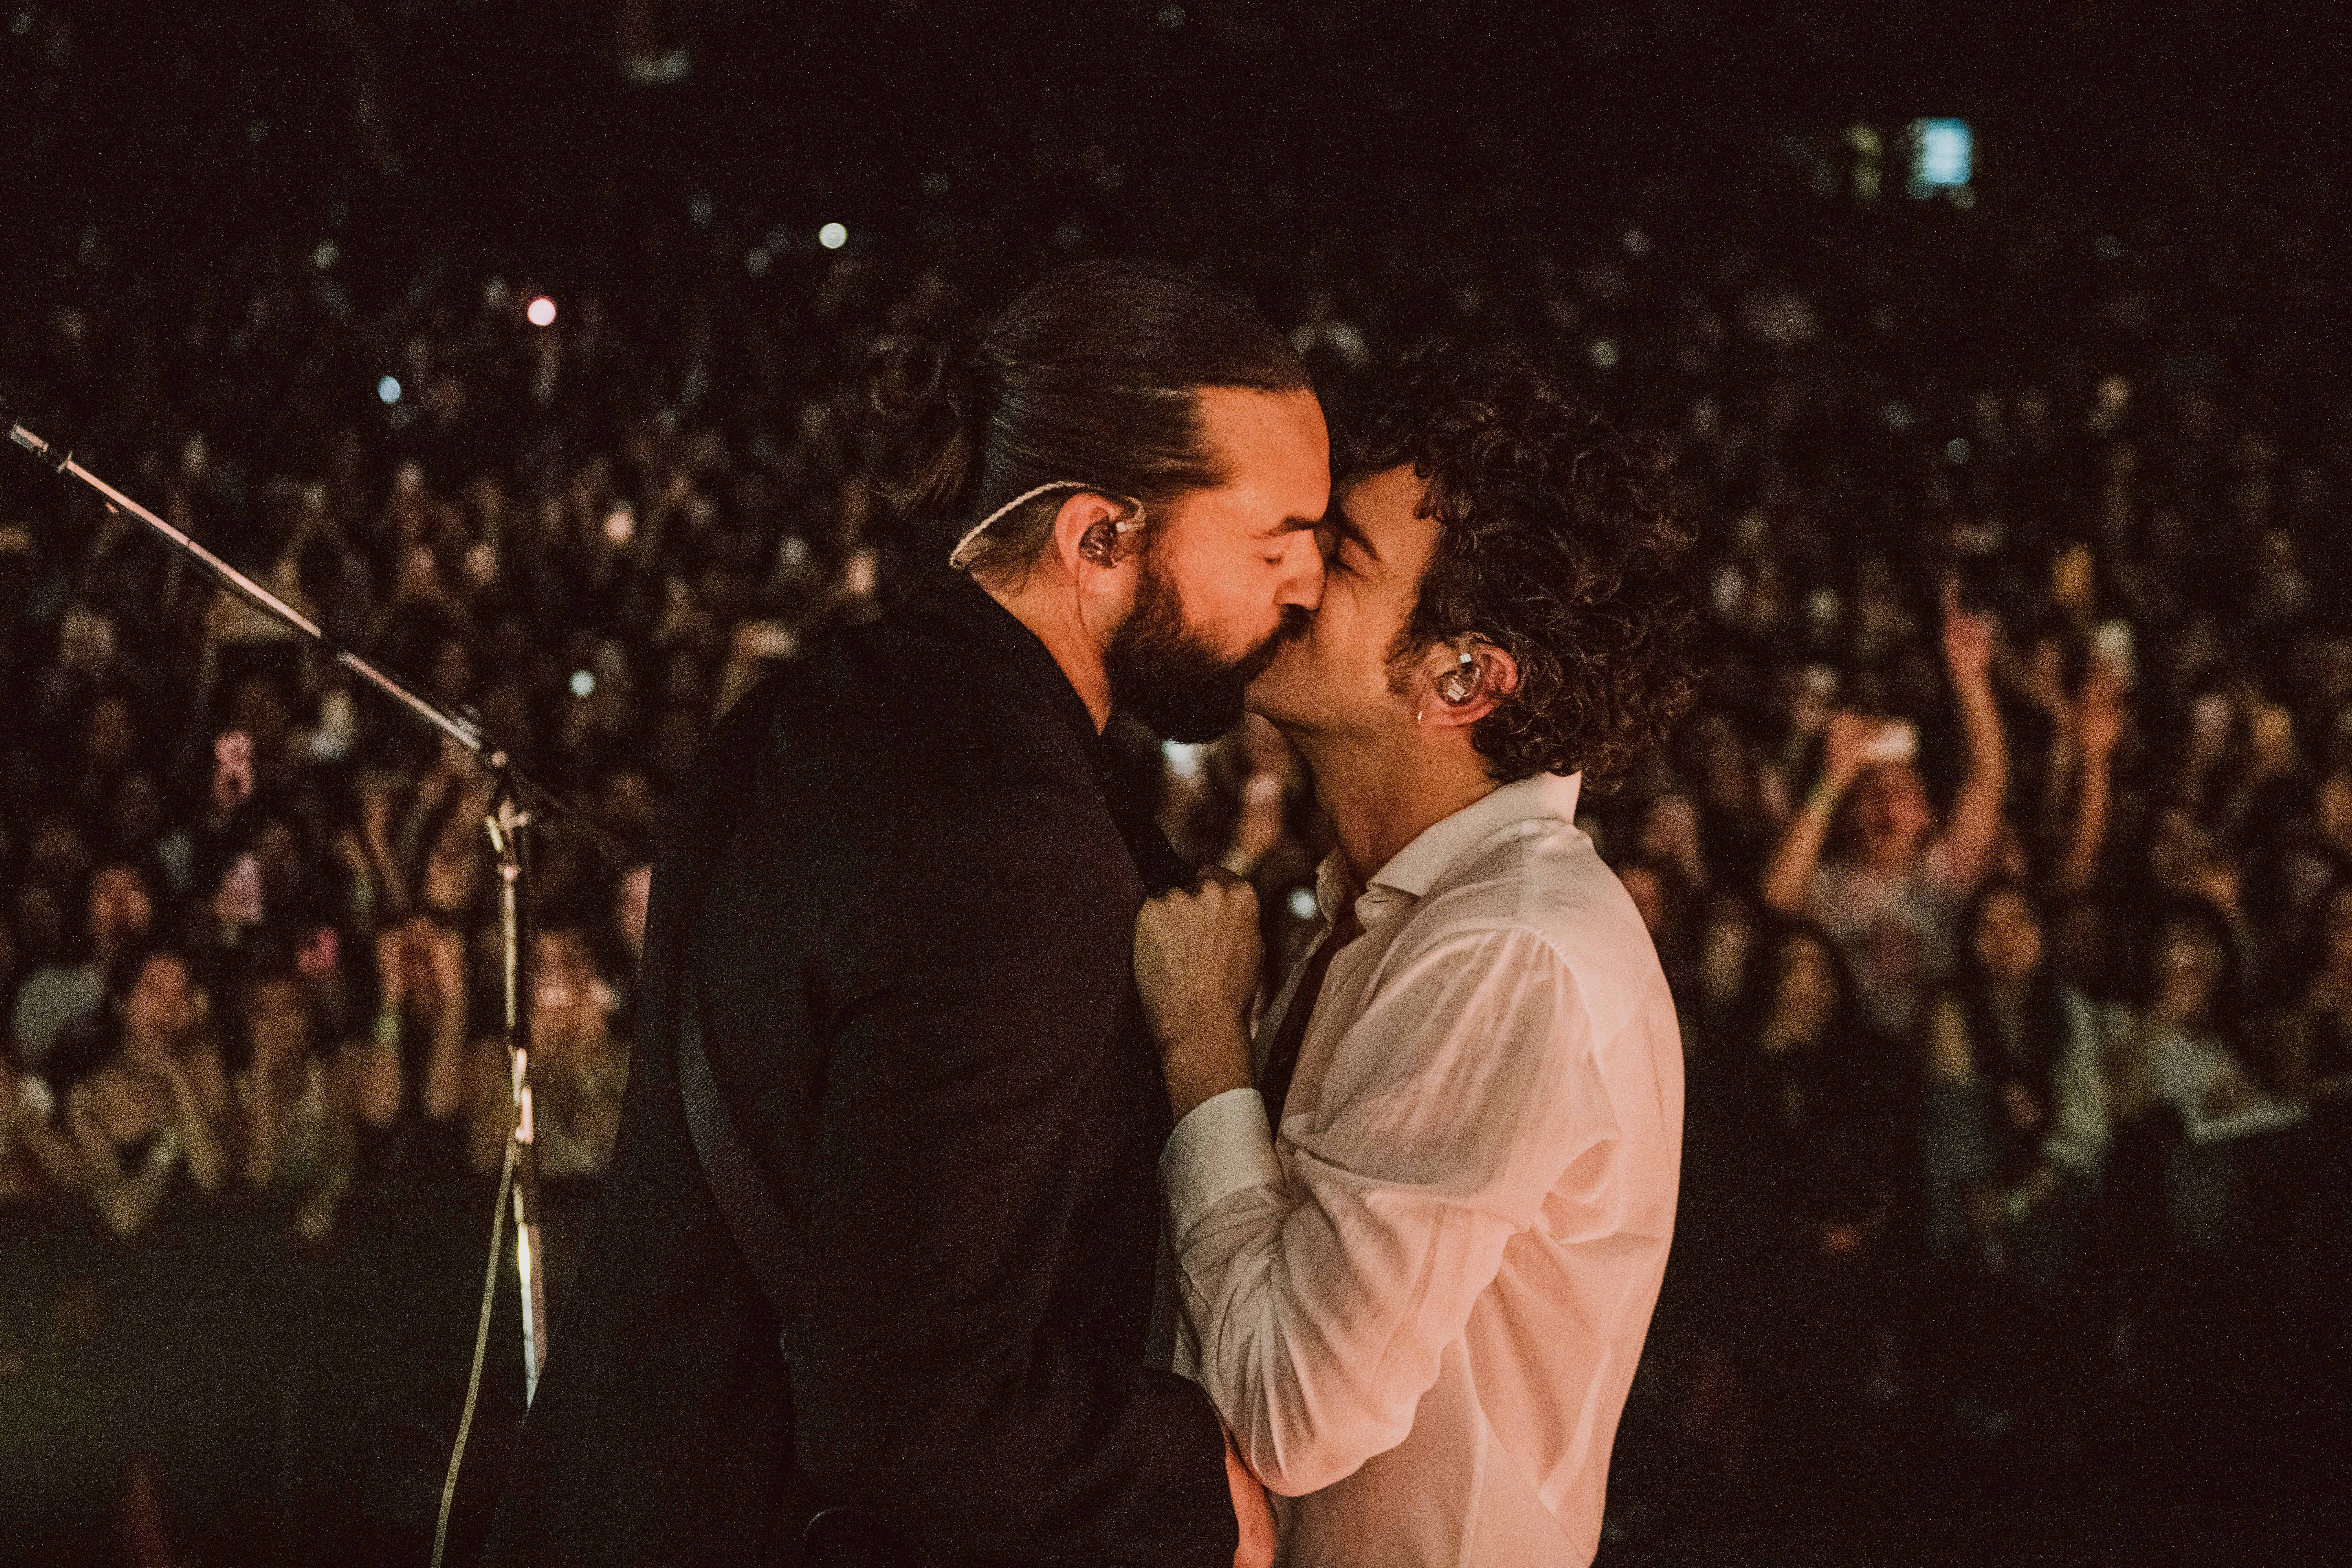 Matty Healy (right) kisses Ross MacDonald on stage at the Kia Forum, Los Angeles